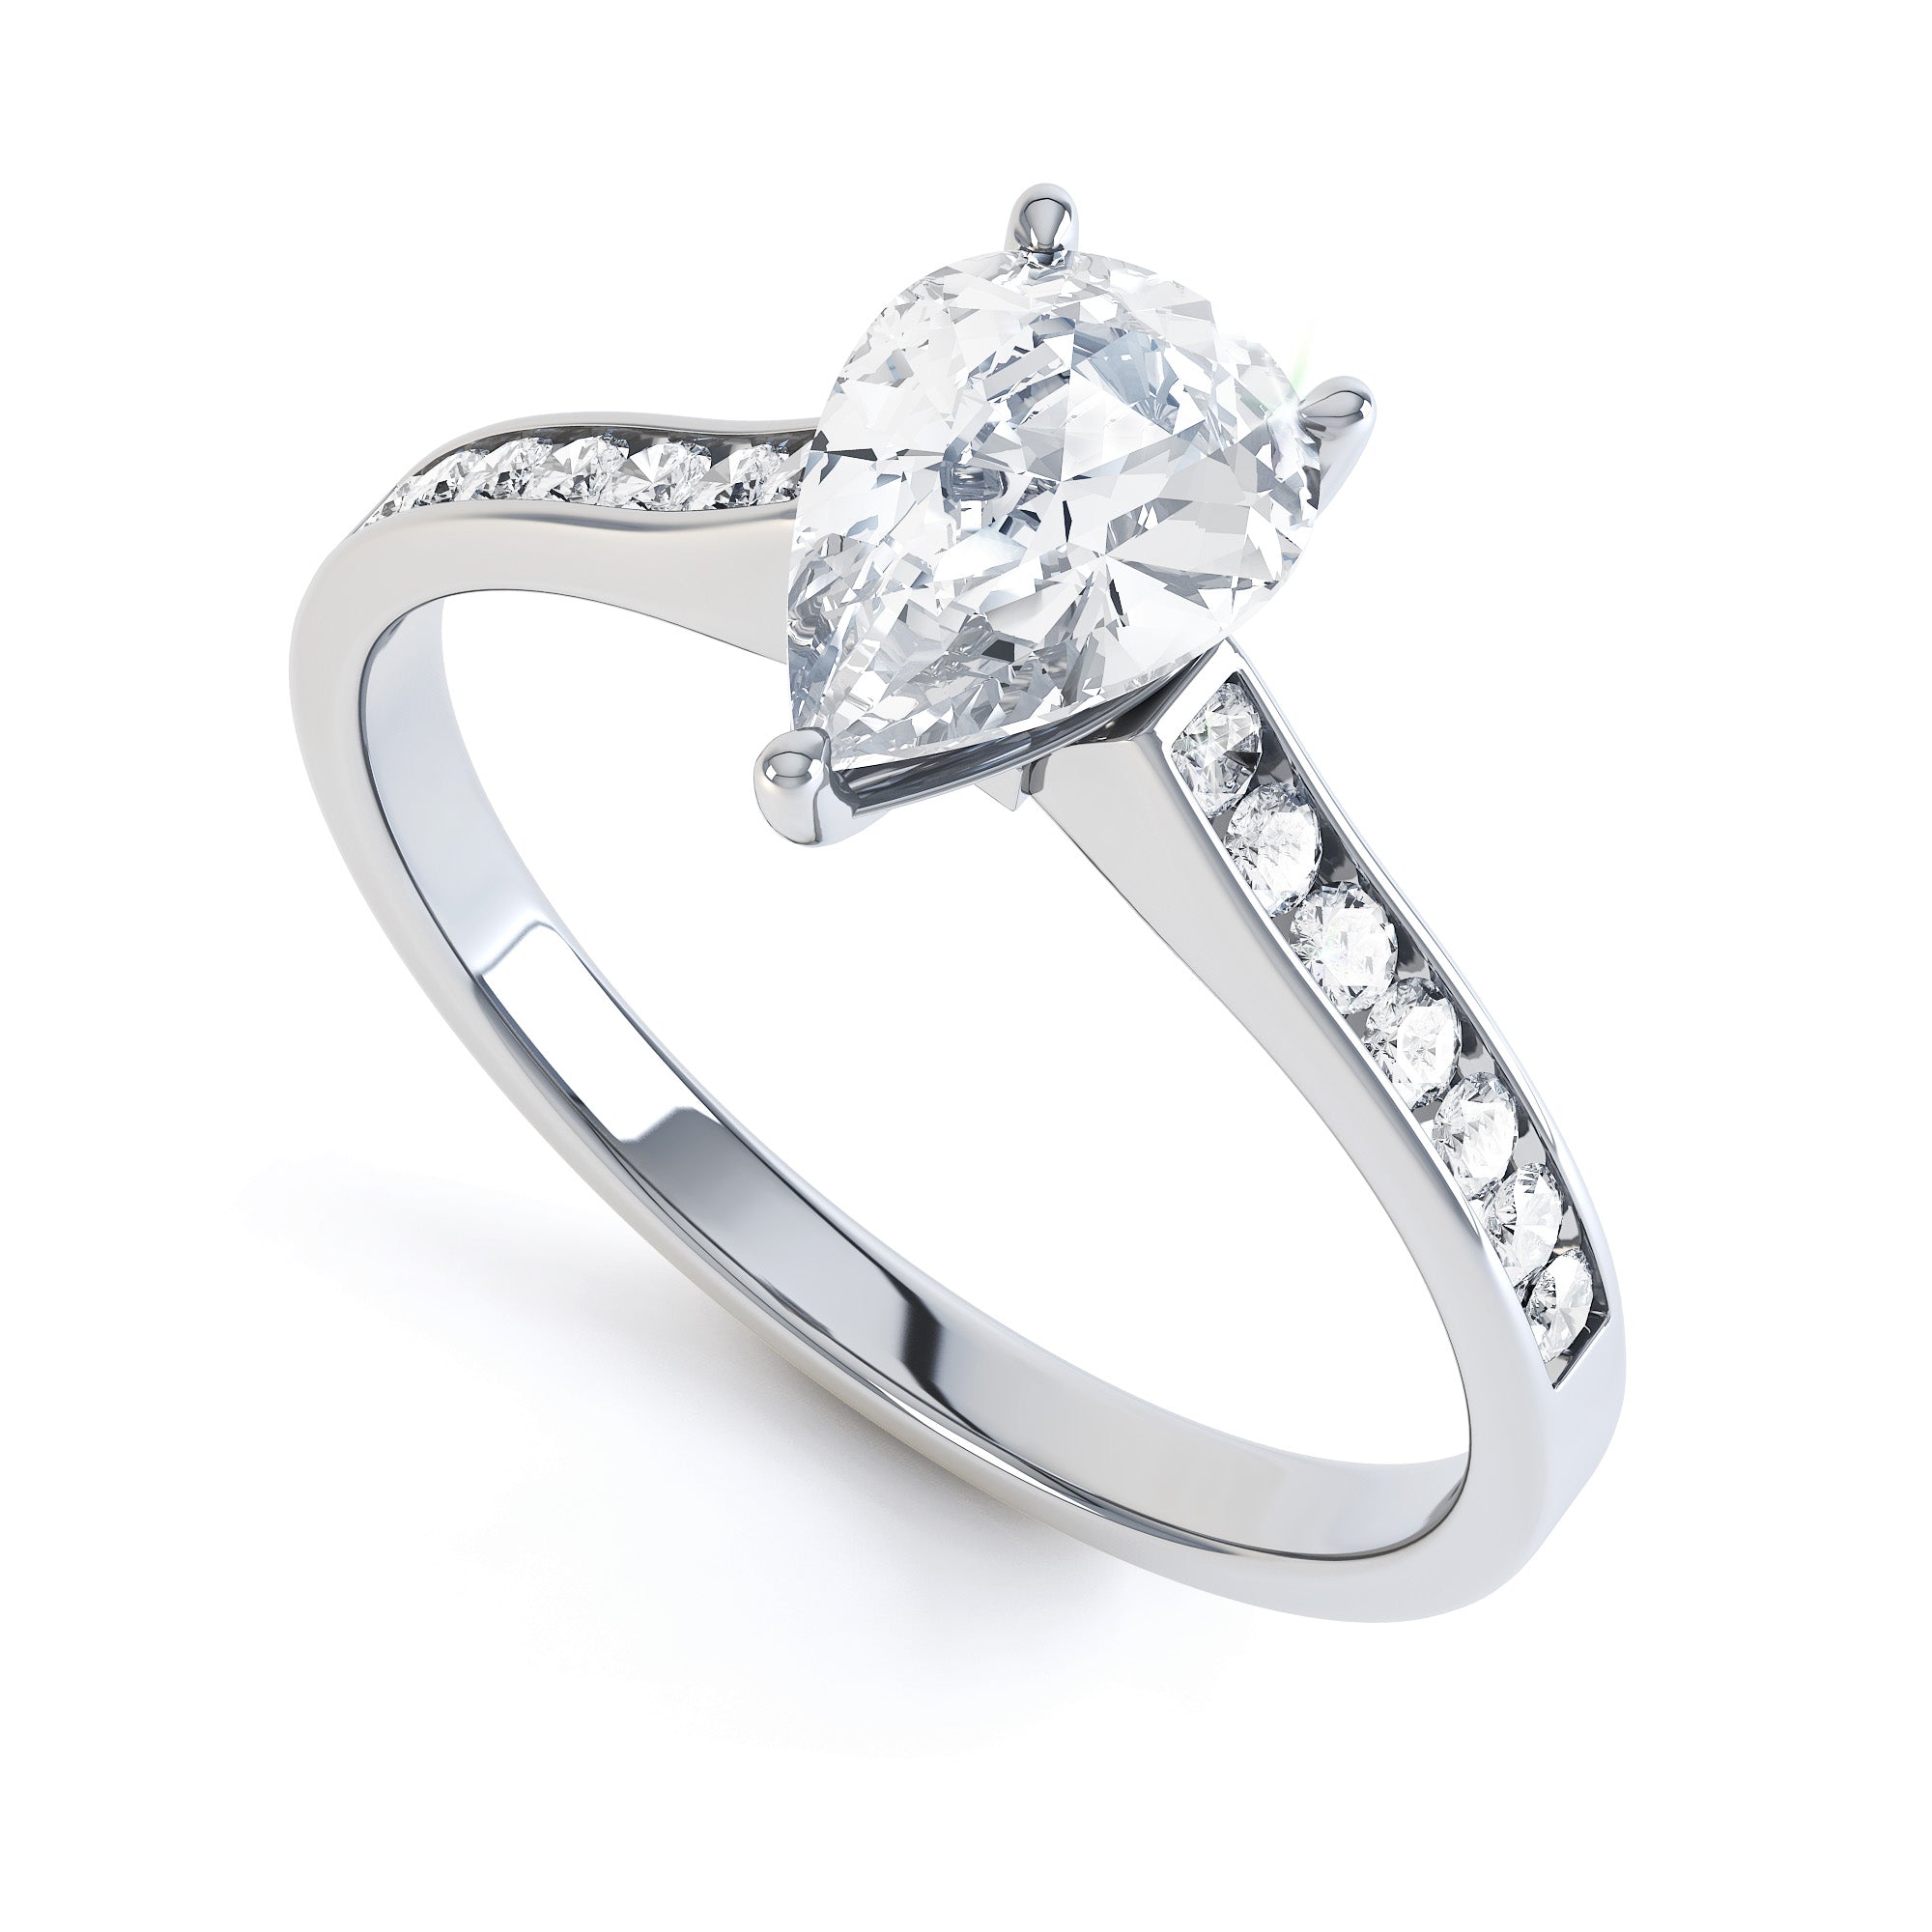 Diamond Engagement Ring- Pear Shaped, three claws Solitaire With Channel set